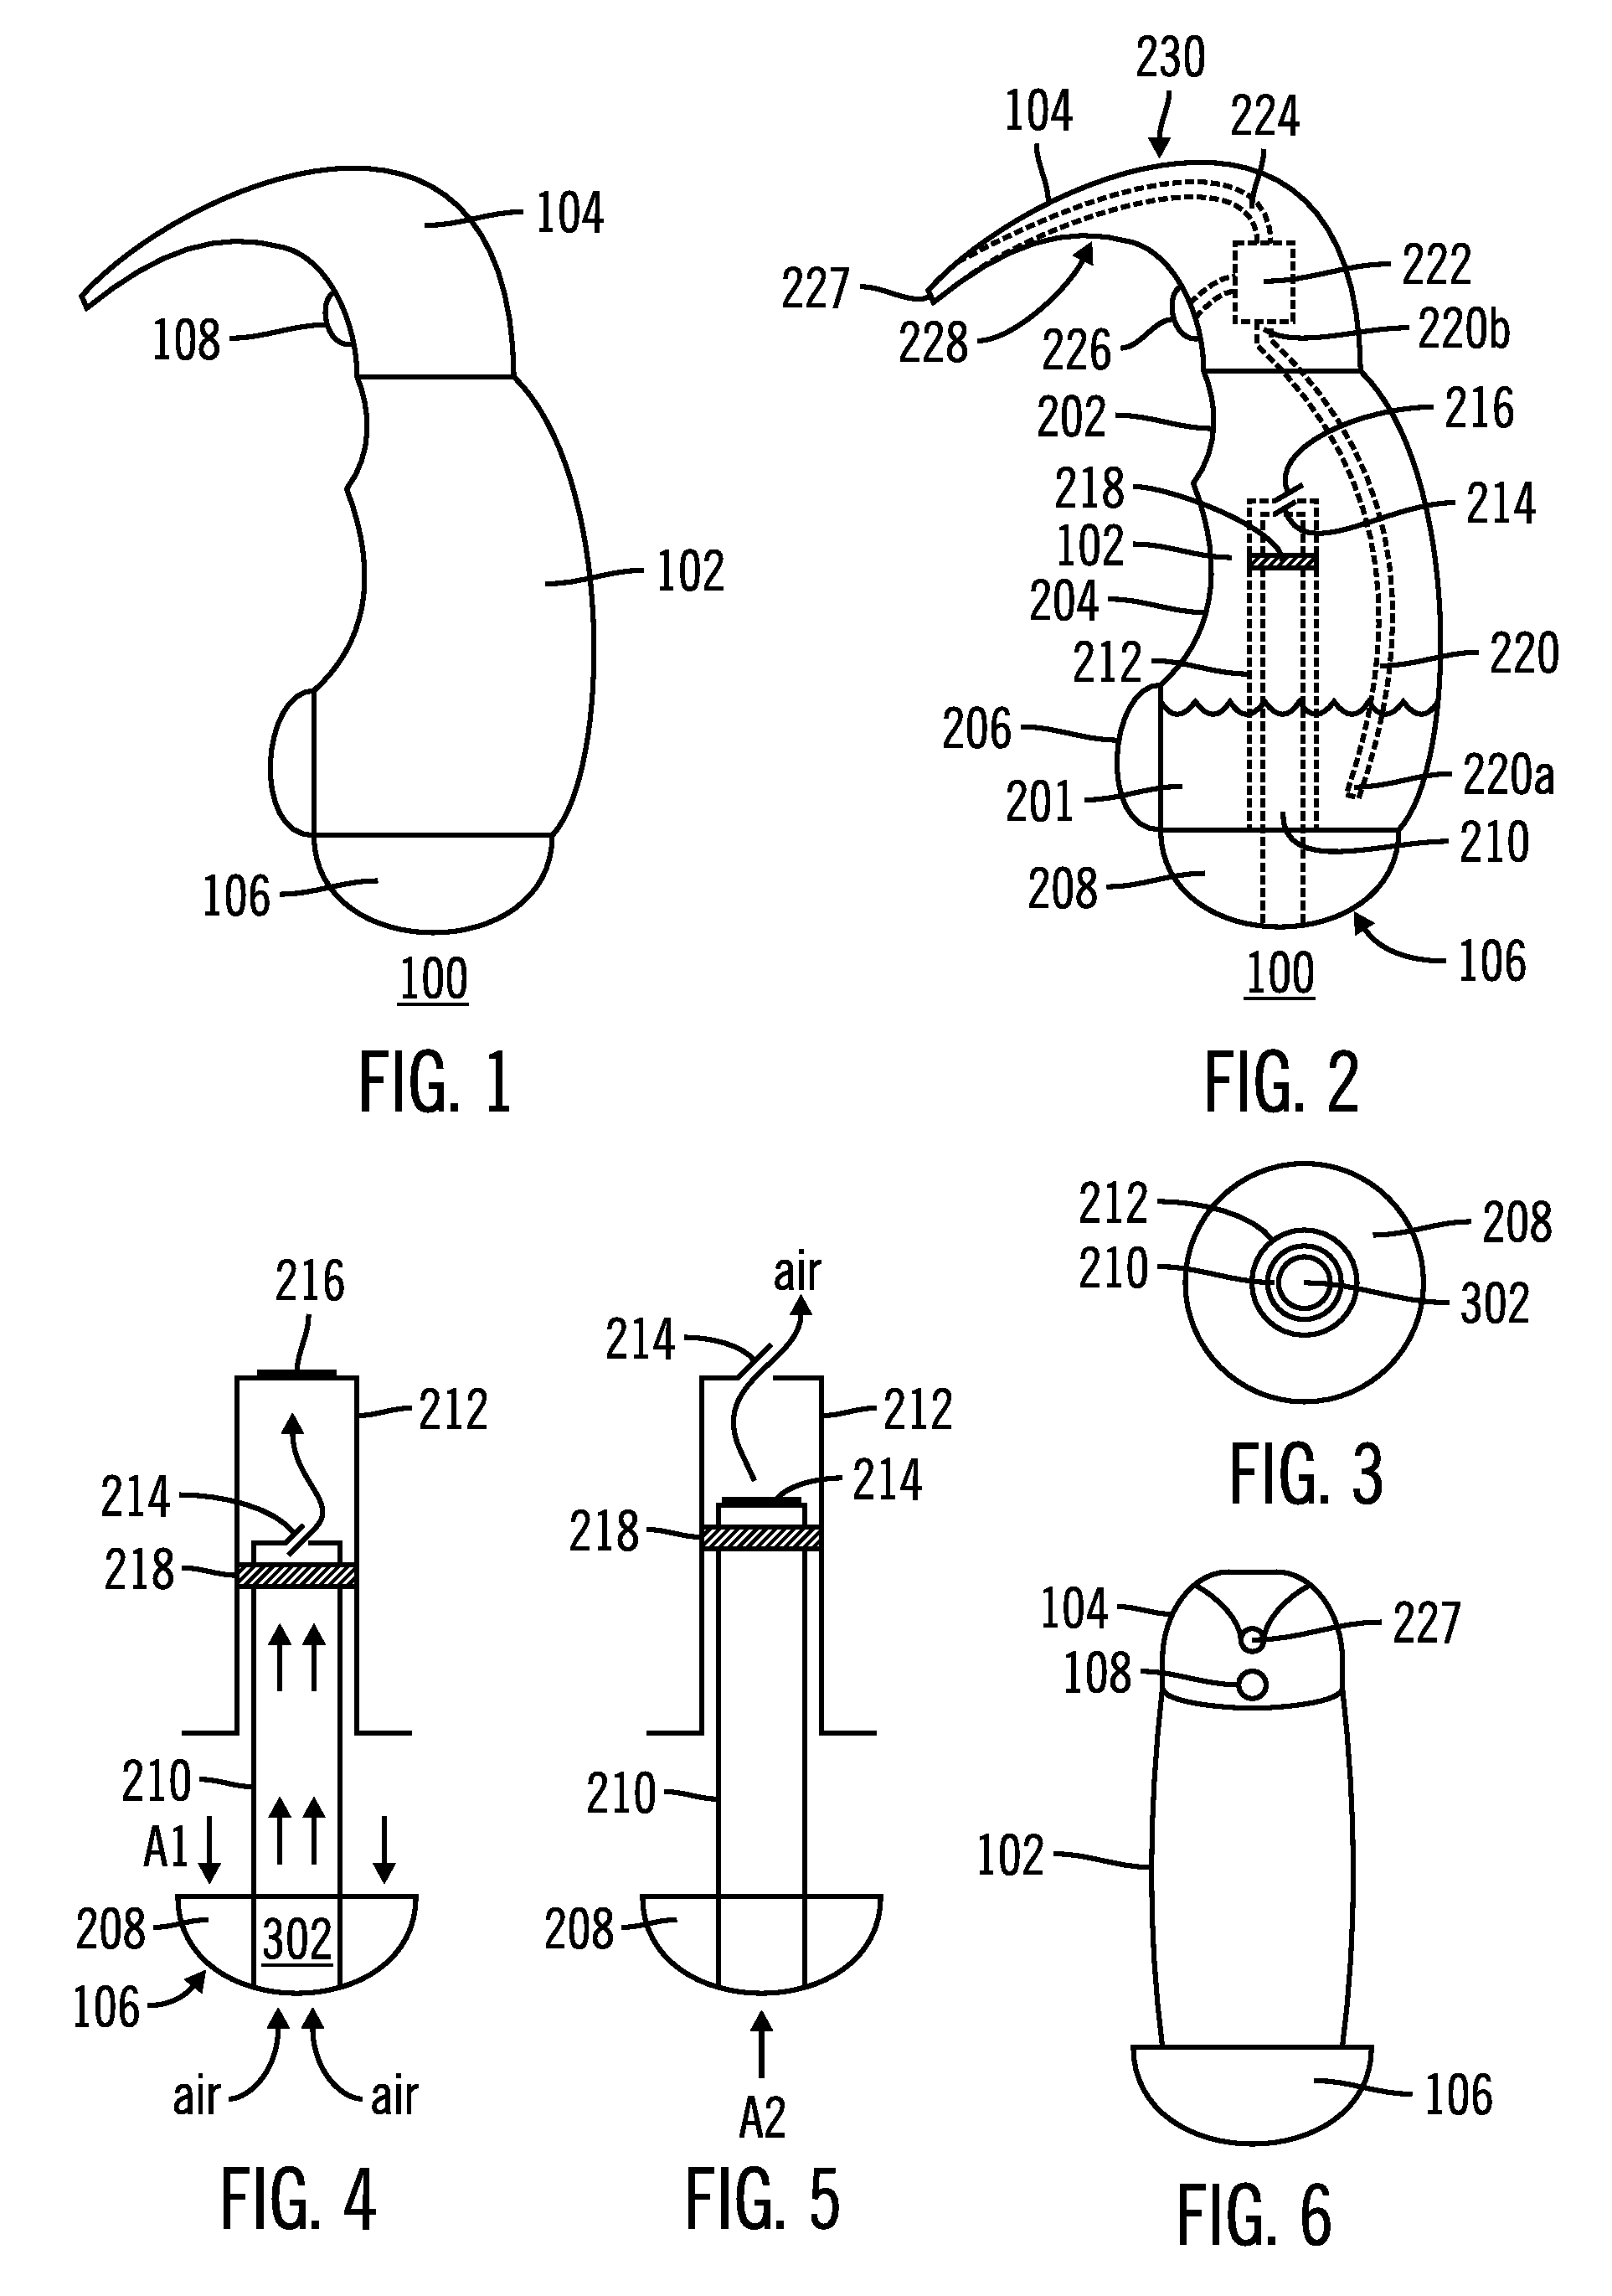 Method and Device for Oral Irrigation